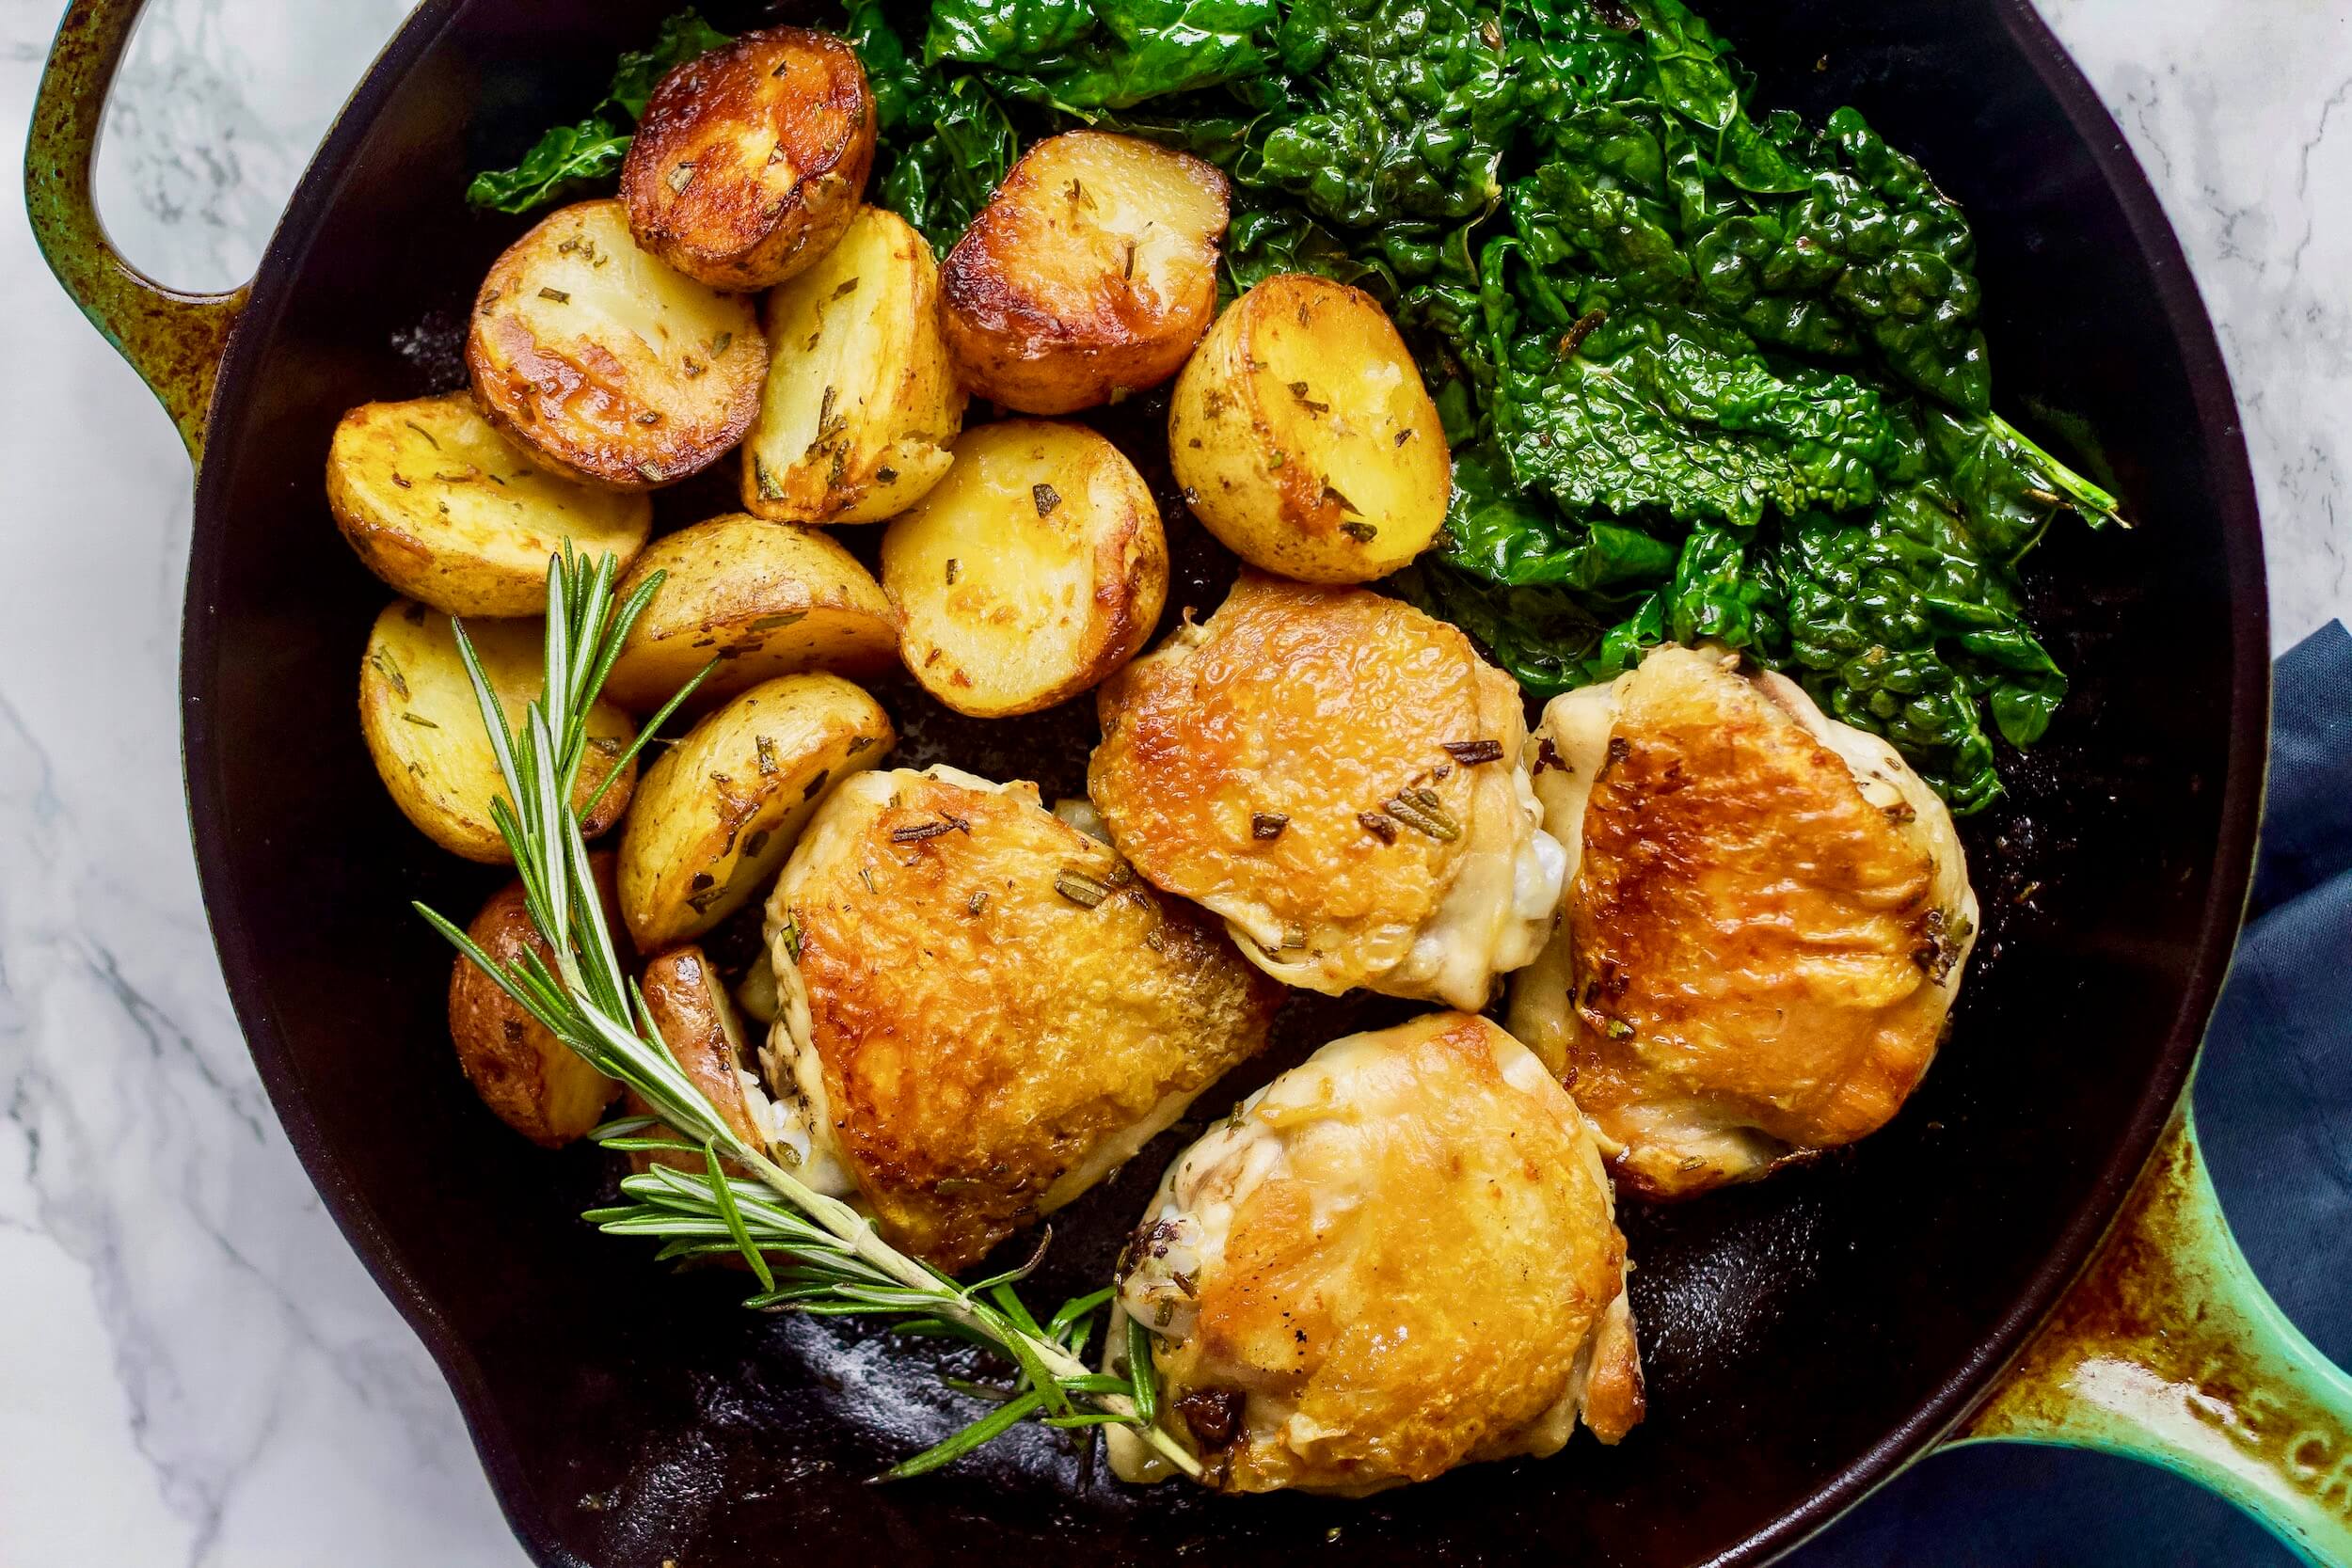 20 Simple Meals to Help Your Clients Hit Their Macros: One Pan Crispy Chicken with Potatoes & Greens